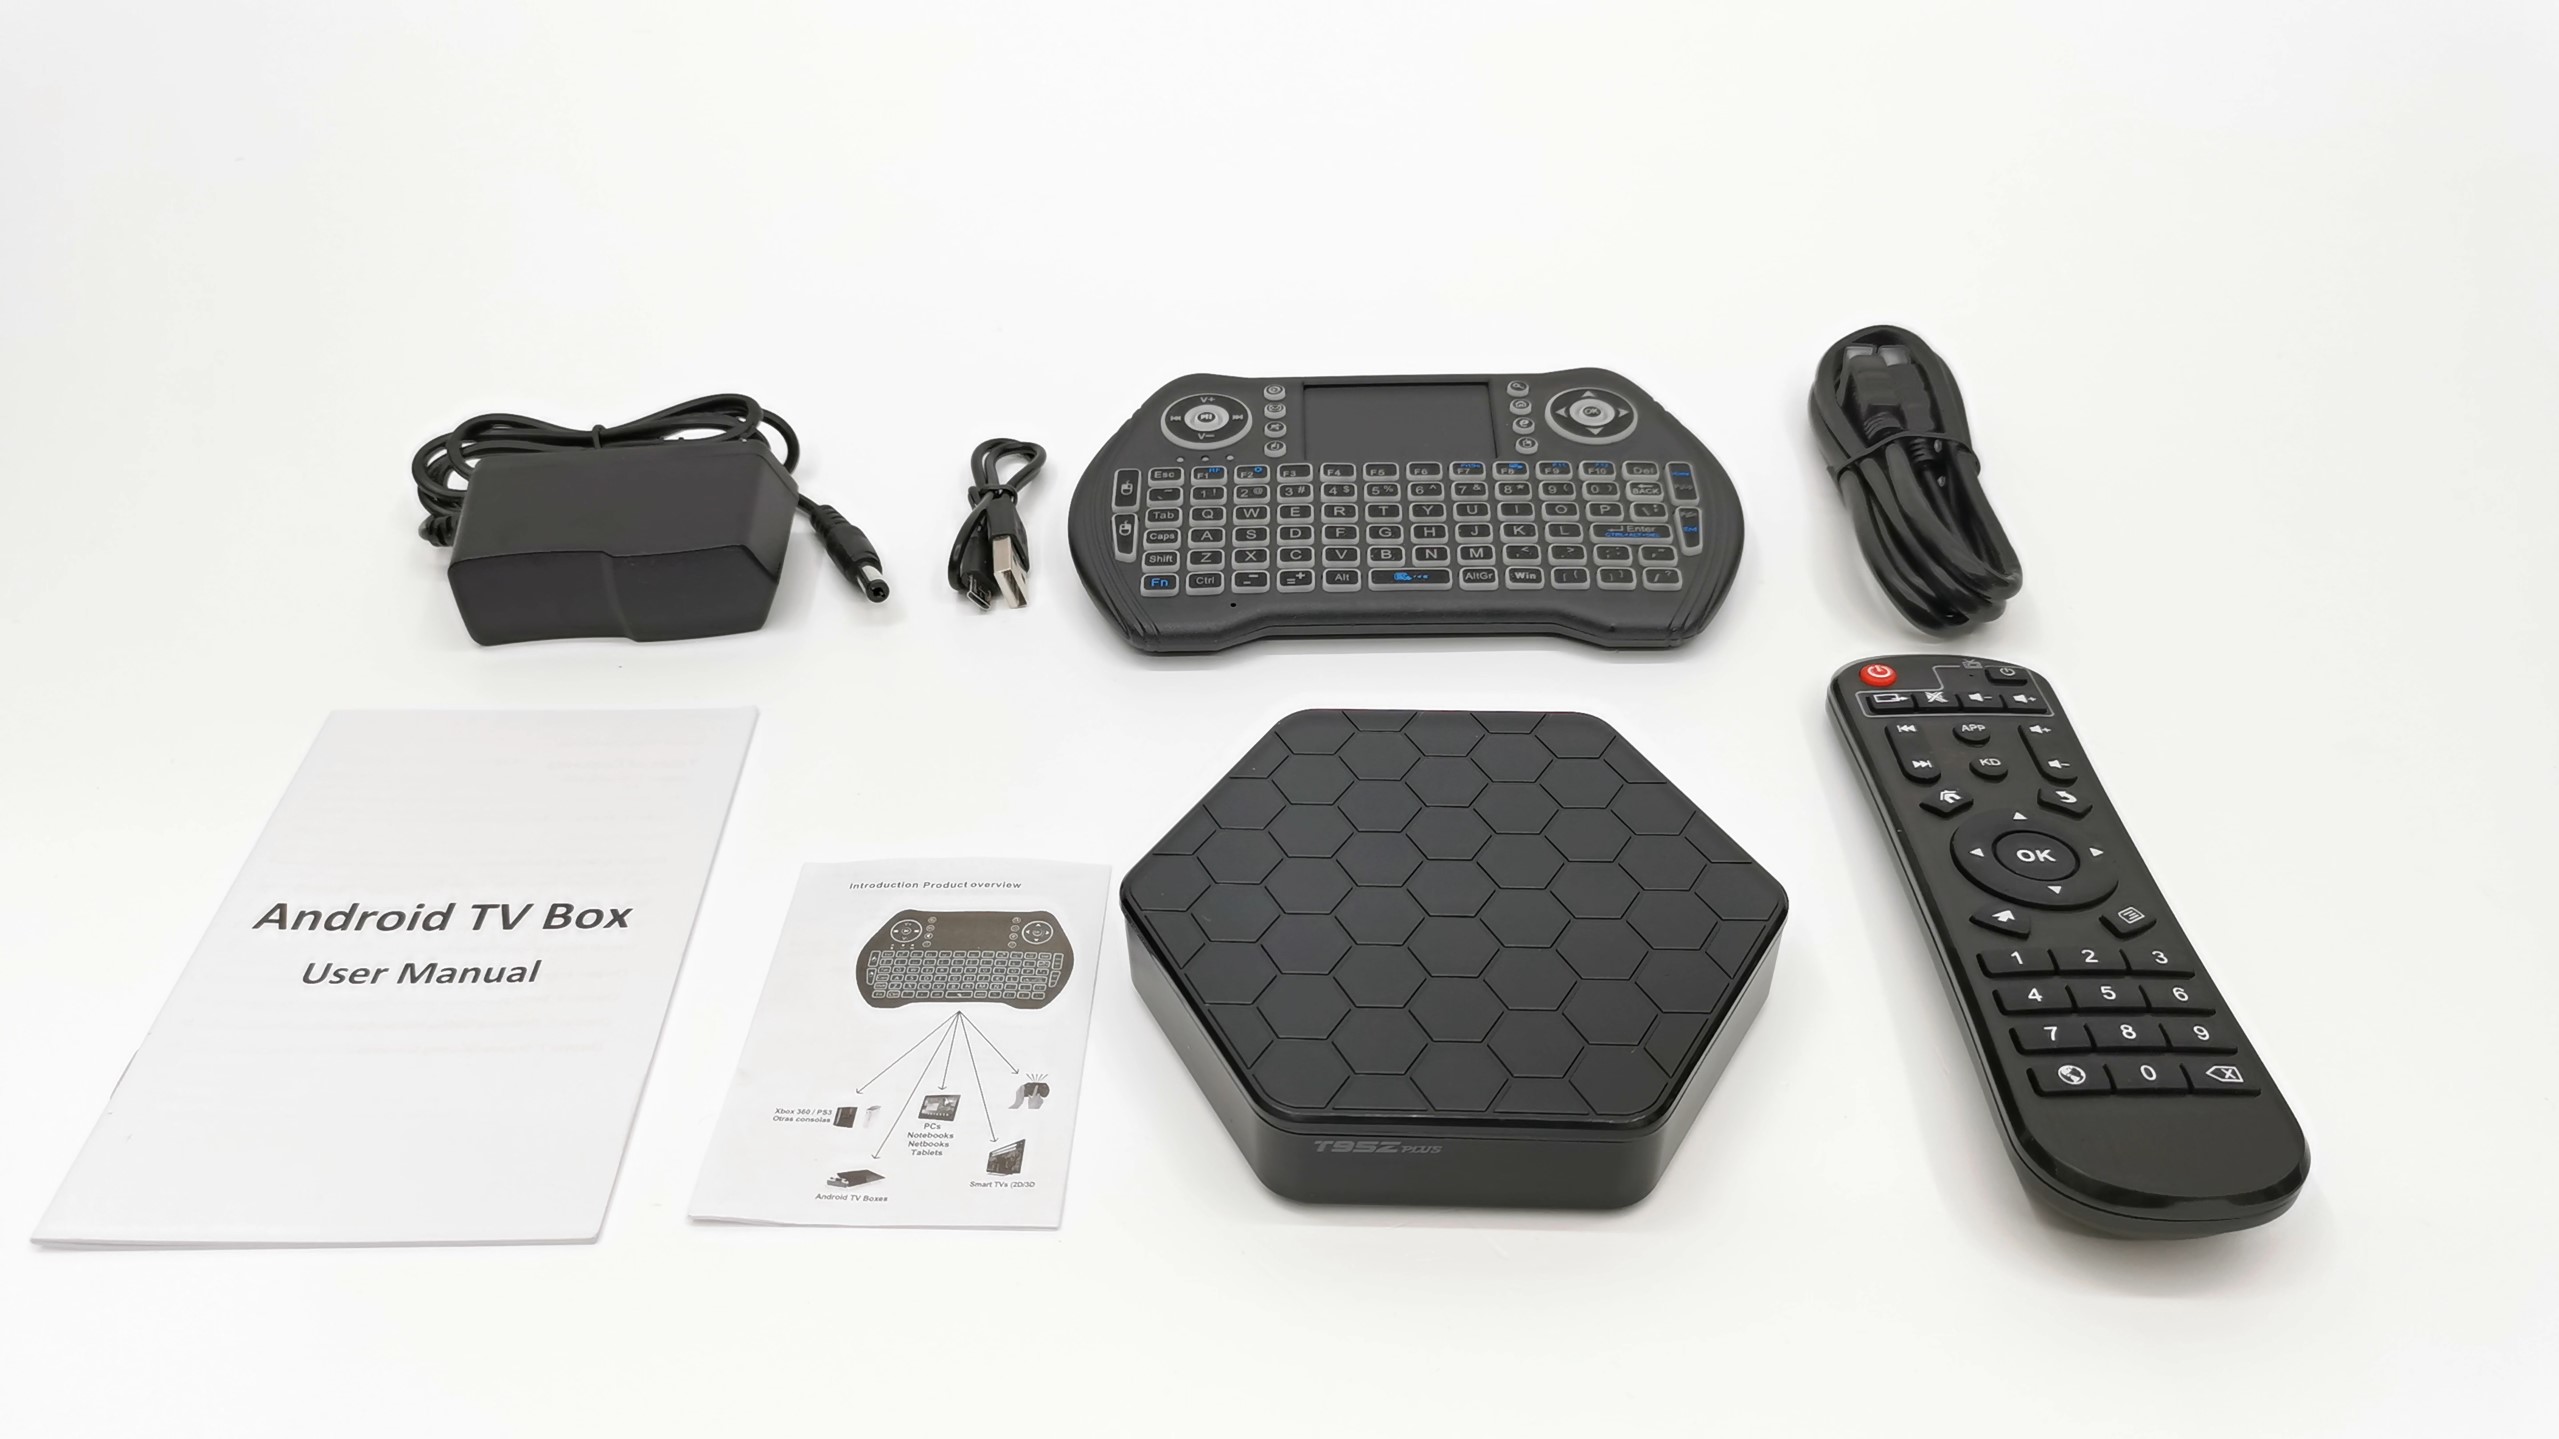 T95z Plus 6K HDR Android 12.0 TV Box - 4GB/64GB